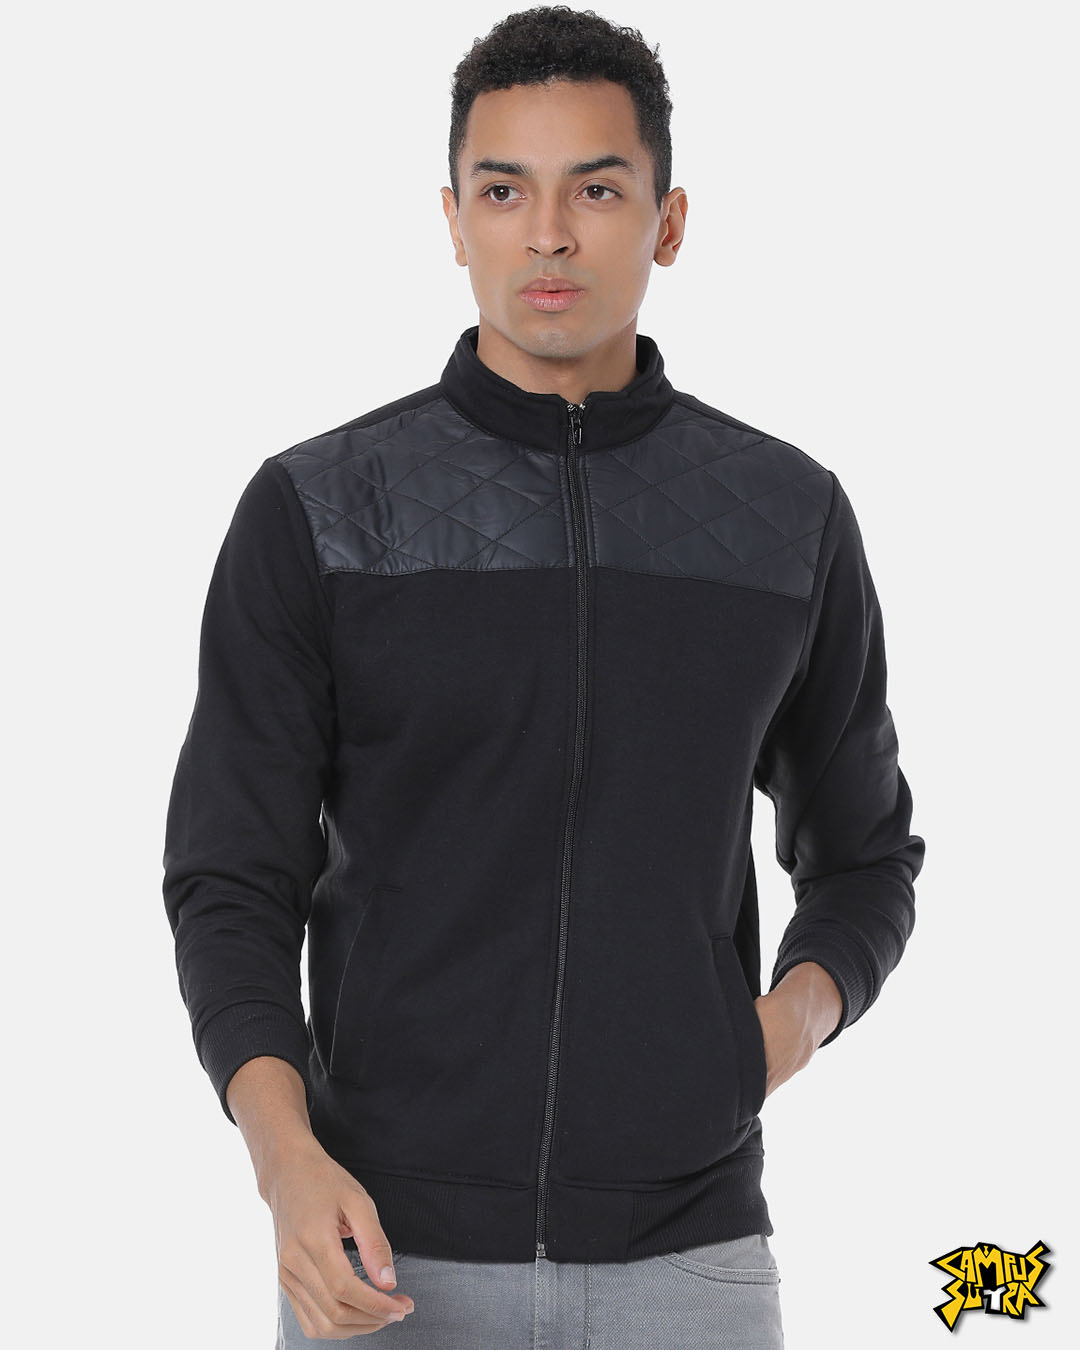 Buy CAMPUS SUTRA Solid Cotton Regular Fit Men's Jacket | Shoppers Stop